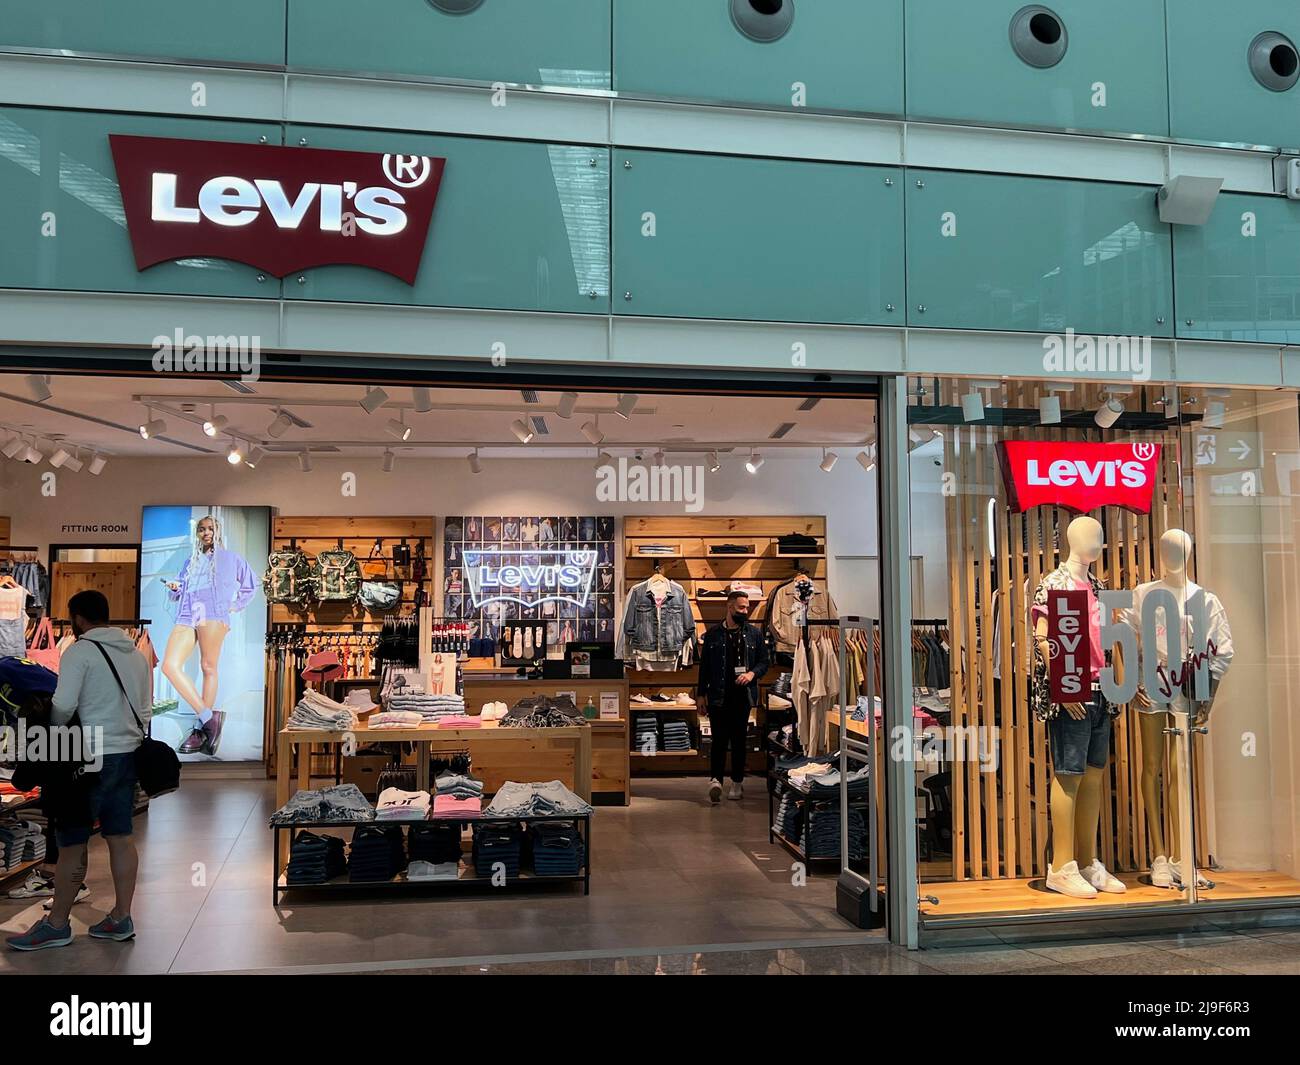 Barcelona, Spain. 21st May, 2022. The Levi's store at Terminal 1 at Josep  Tarradellas Barcelona-El Prat Airport (BCN) on May 21, 2022. The airport is  commonly known as Barcelona Airport or El